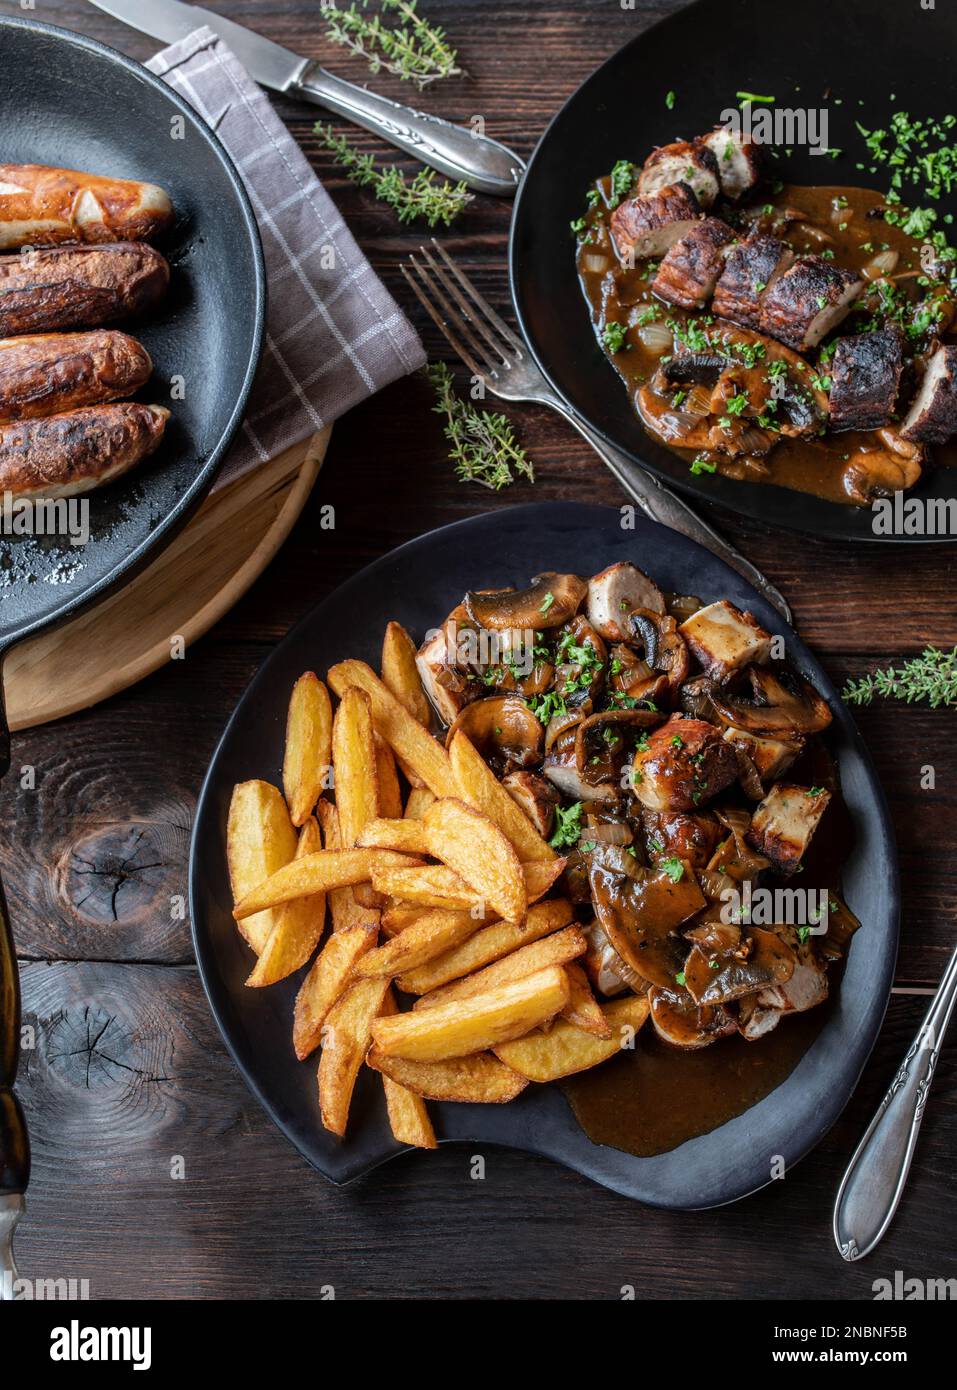 Fried sausage dish with pan fried german bratwurst, onion mushroom sauce and homemade french fries on a table with plates and pan. Flat lay Stock Photo